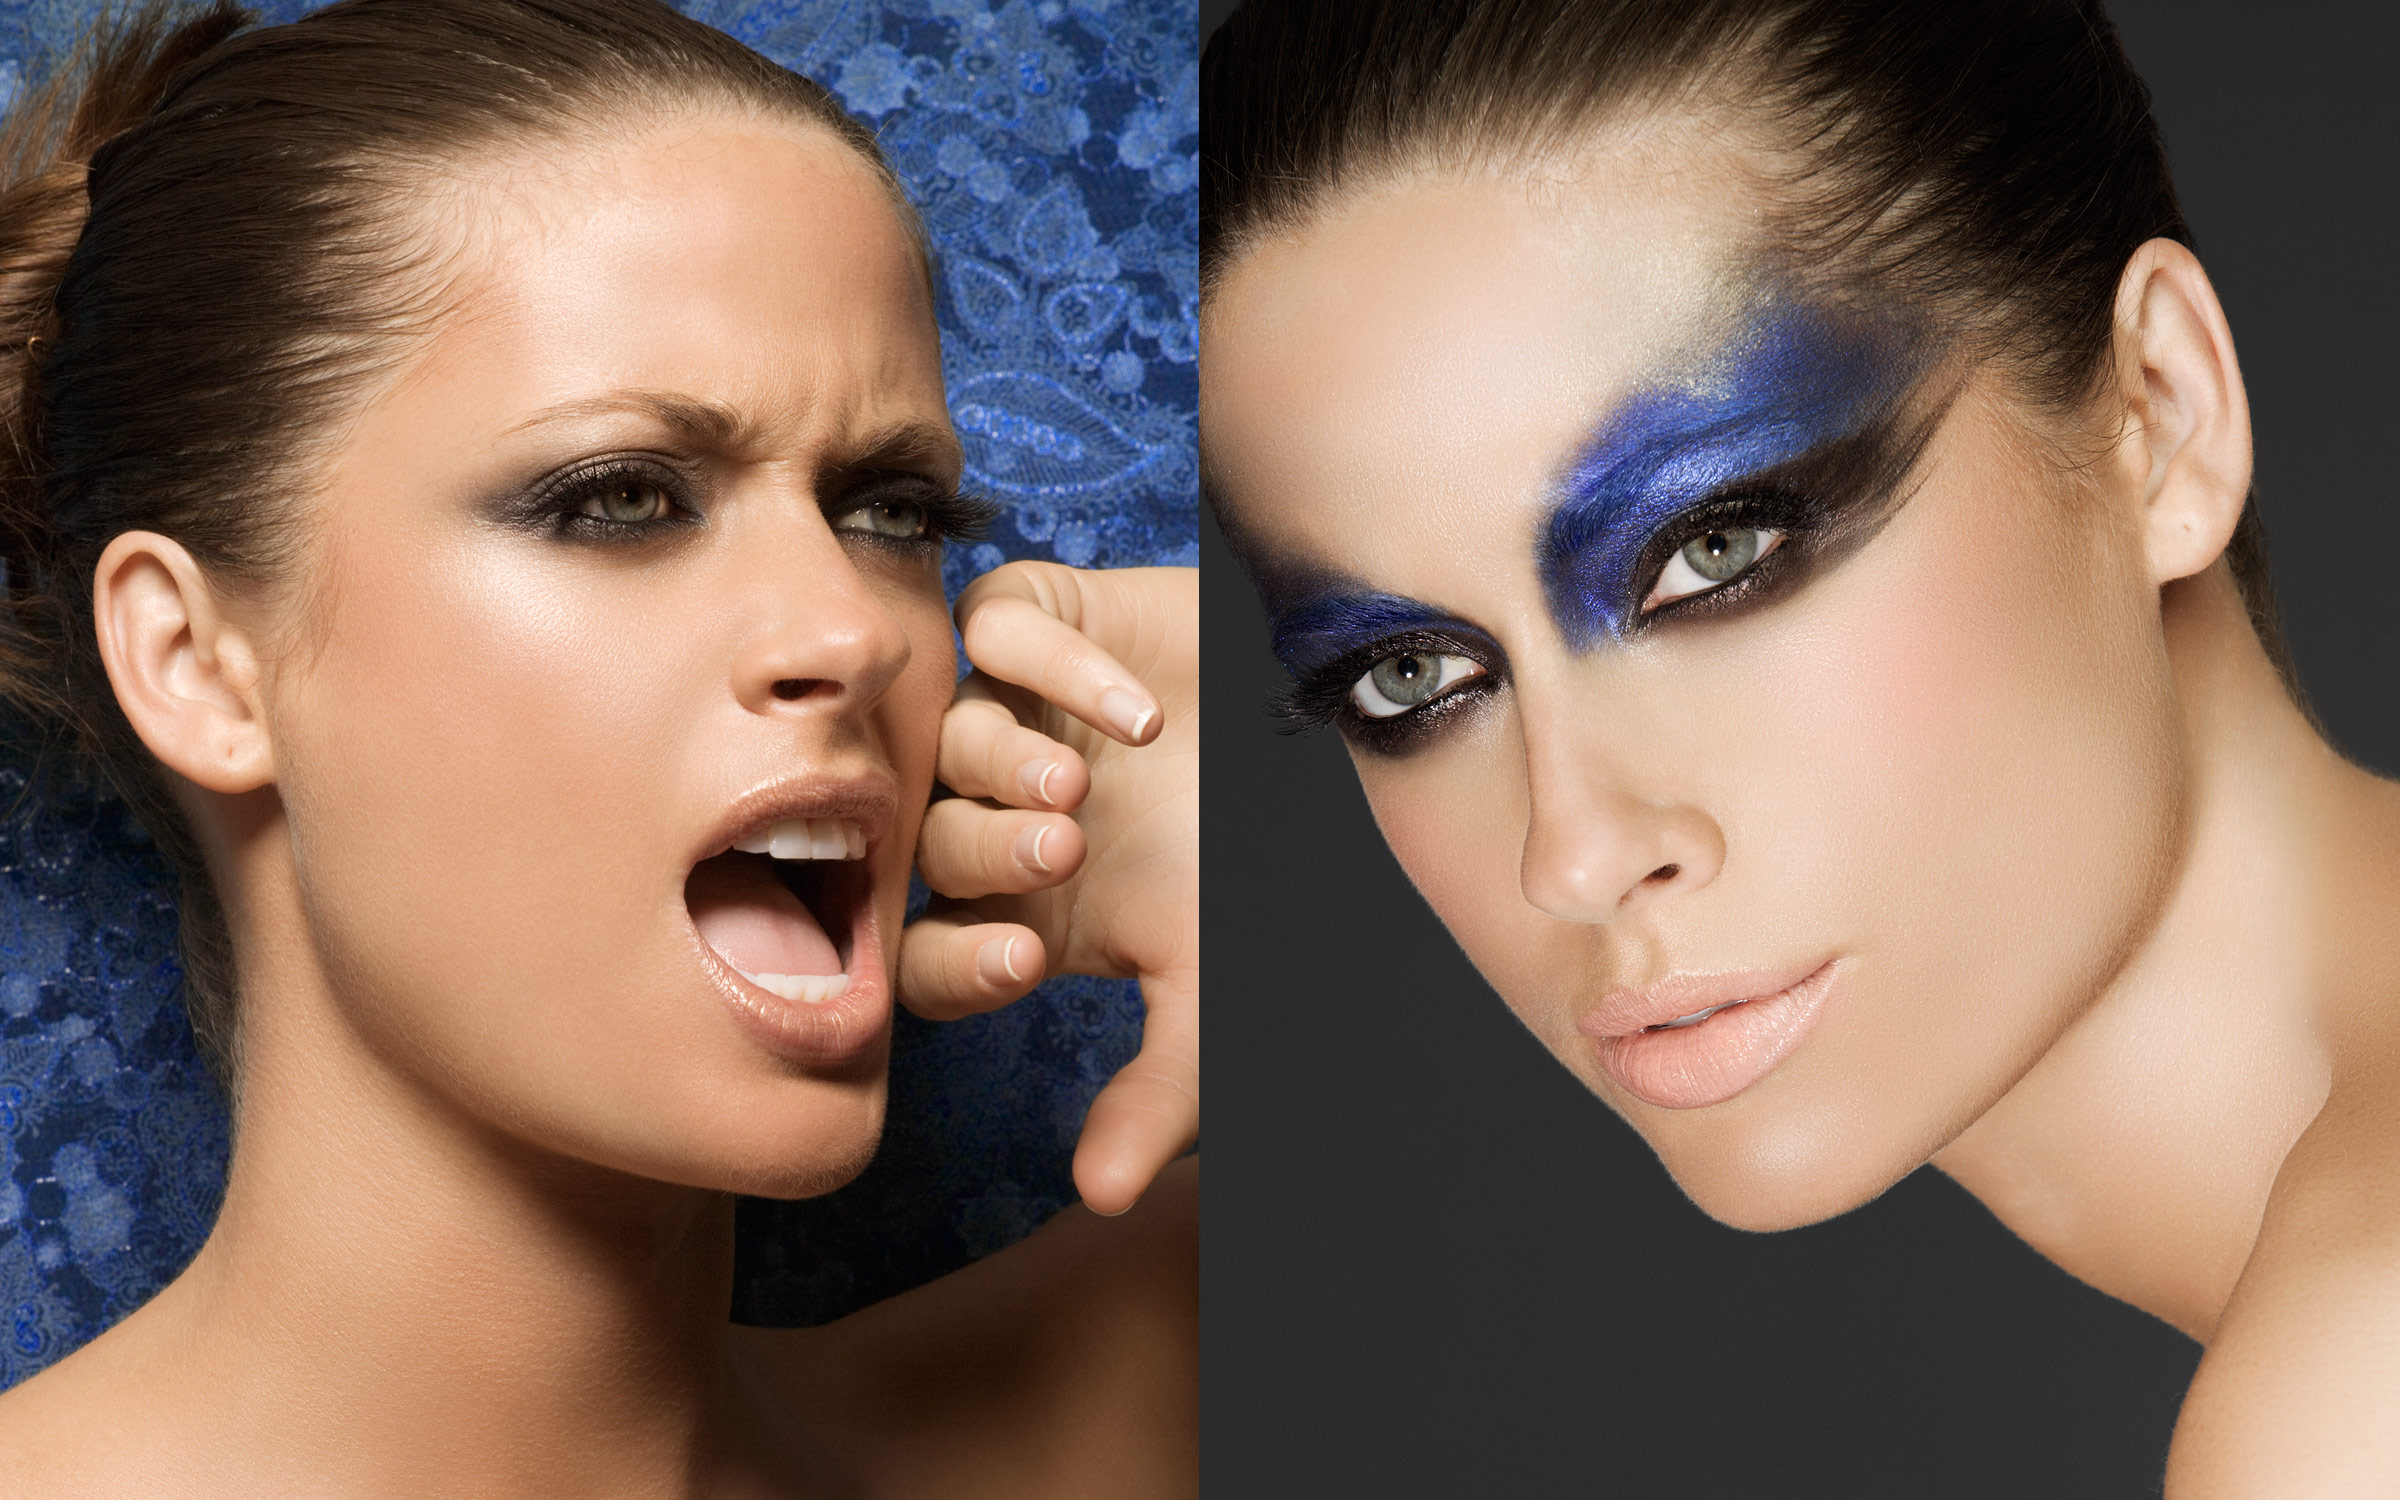 New York Beauty photographer and product photographer